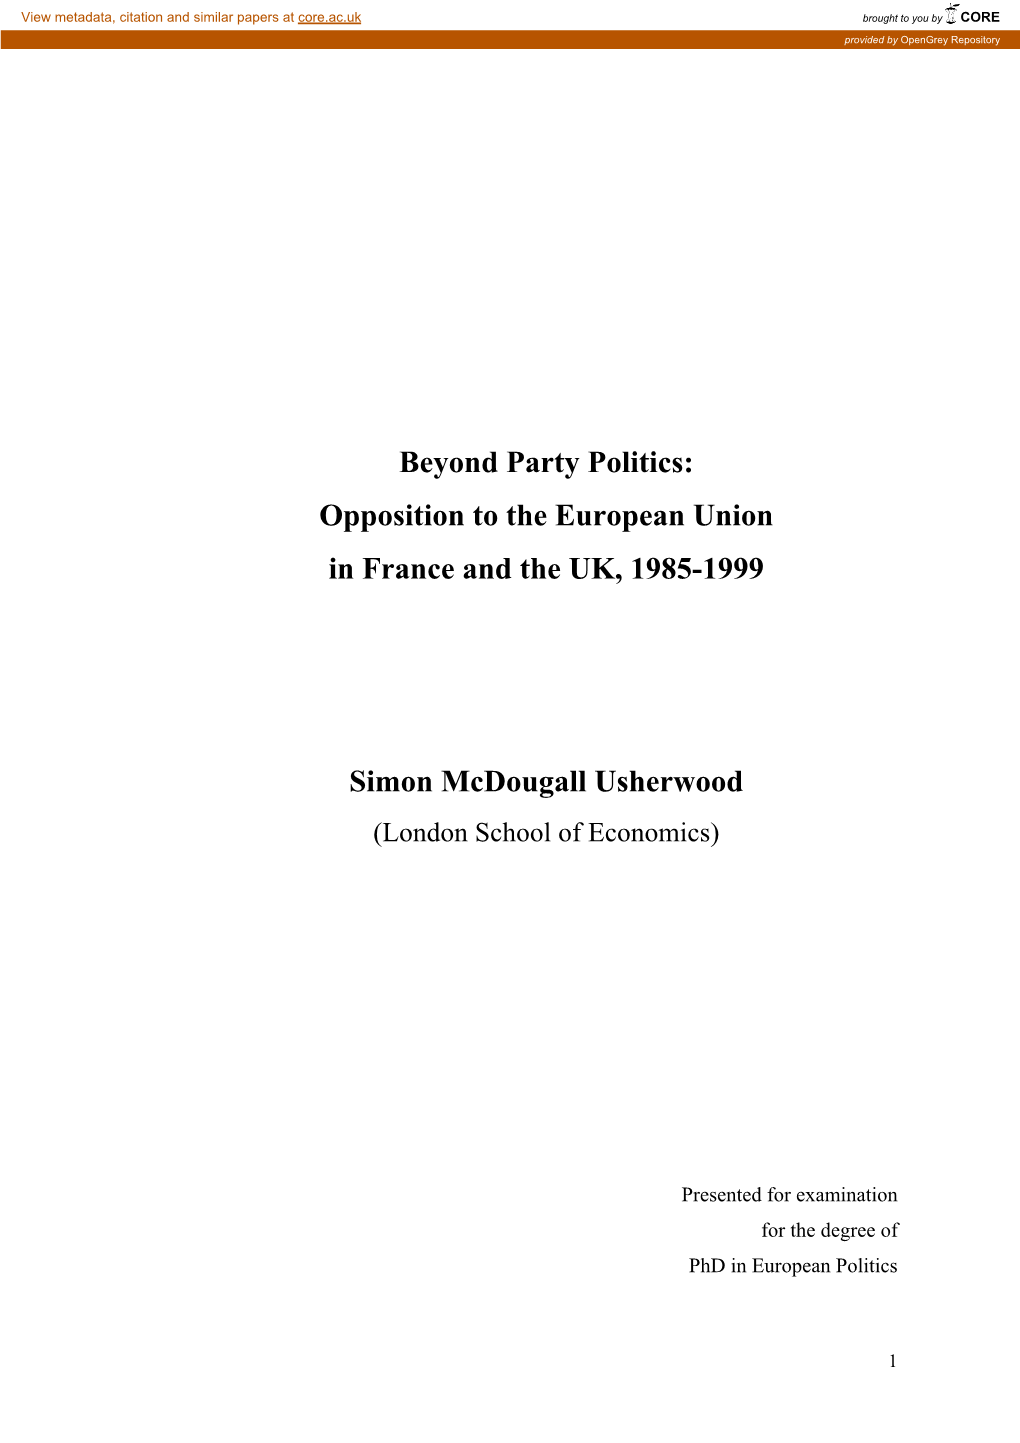 Beyond Party Politics: Opposition to the European Union in France and the UK, 1985-1999